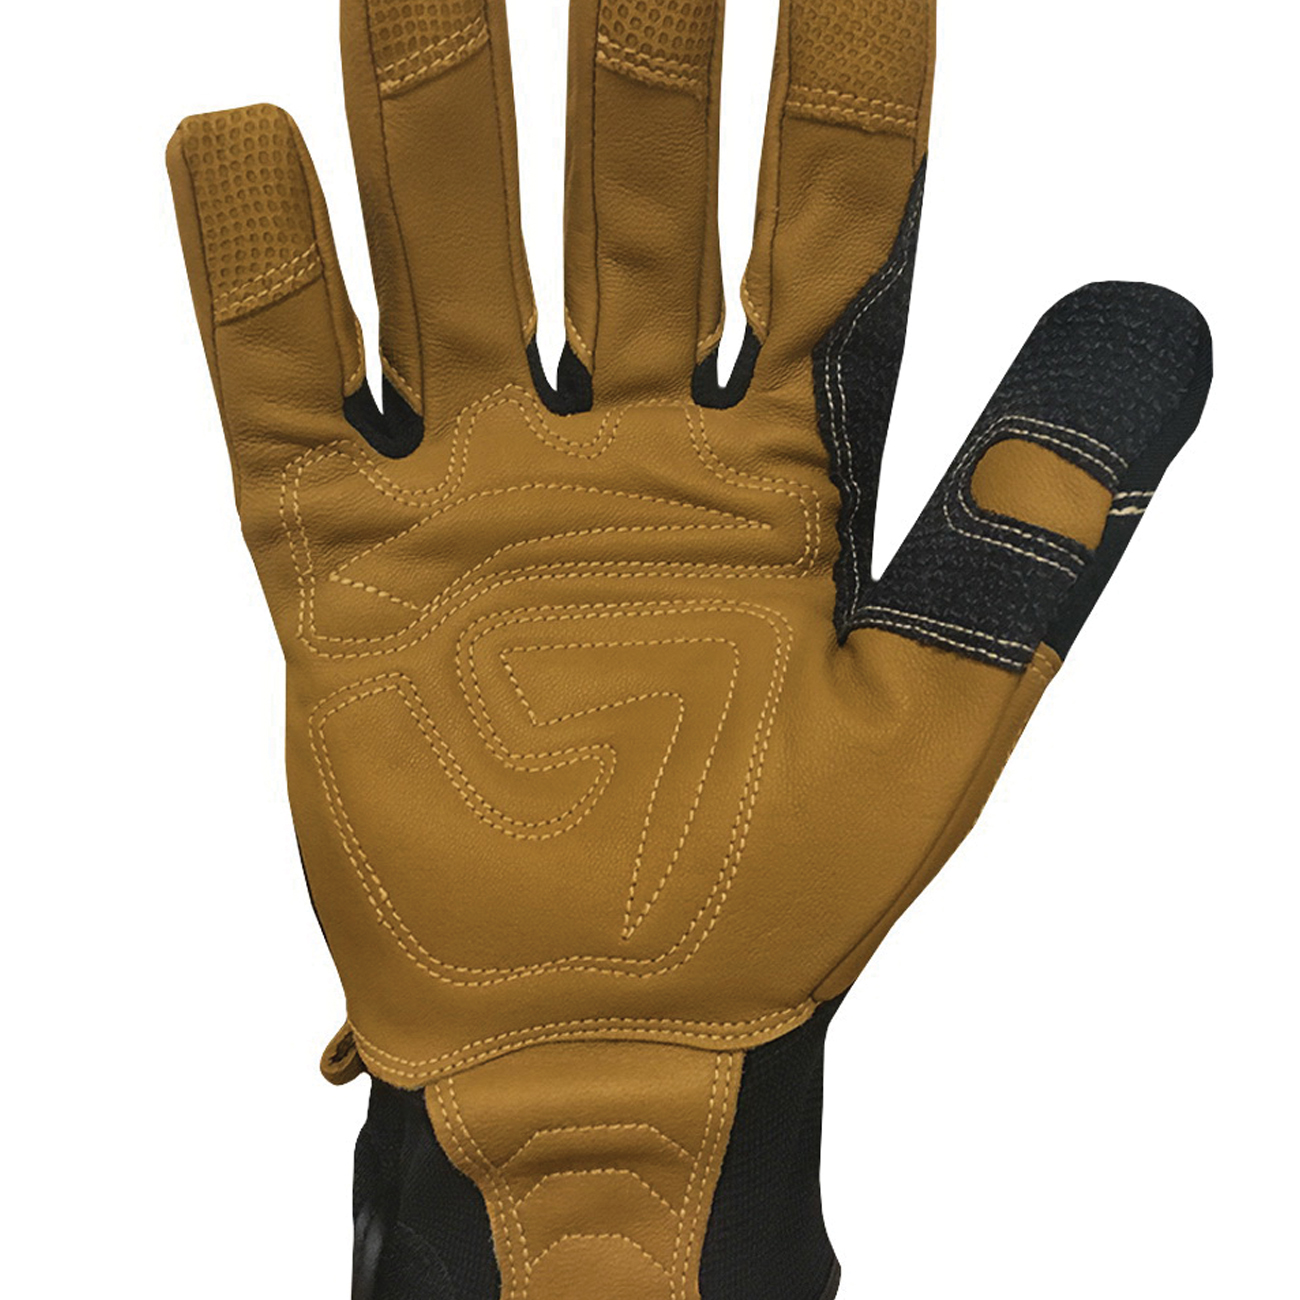 Ironclad RANCHWORX RWG2-05-XL Gloves, XL, 9-1/2 in L, Wing Thumb, Open Cuff, Leather, Black/Tan - 2